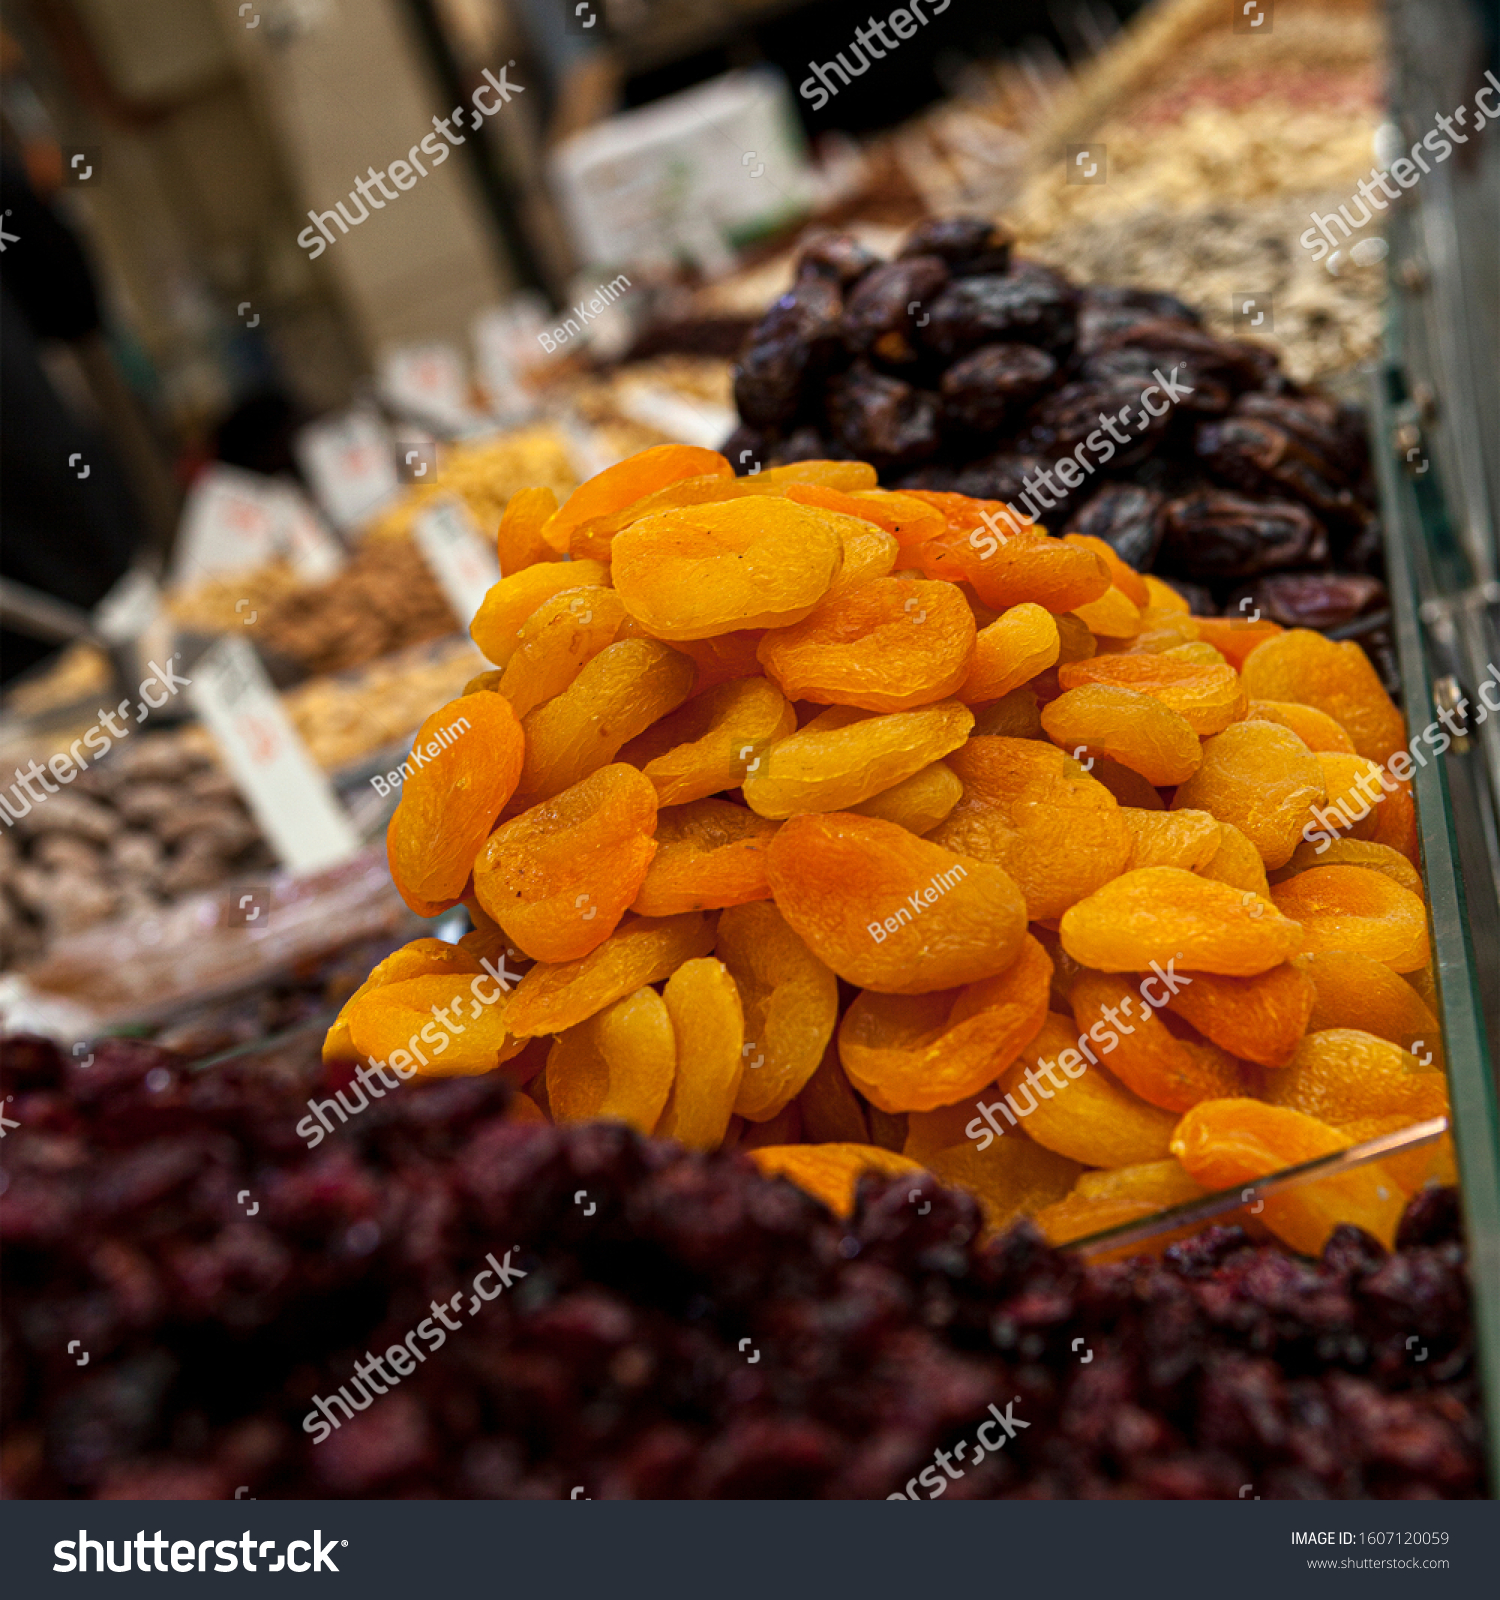 Mix of dried and sun-dried fruits, dried fruits in a wooden box on a white wooden background. View from above. Symbols of the Jewish holiday of Tu B'Shvat #1607120059